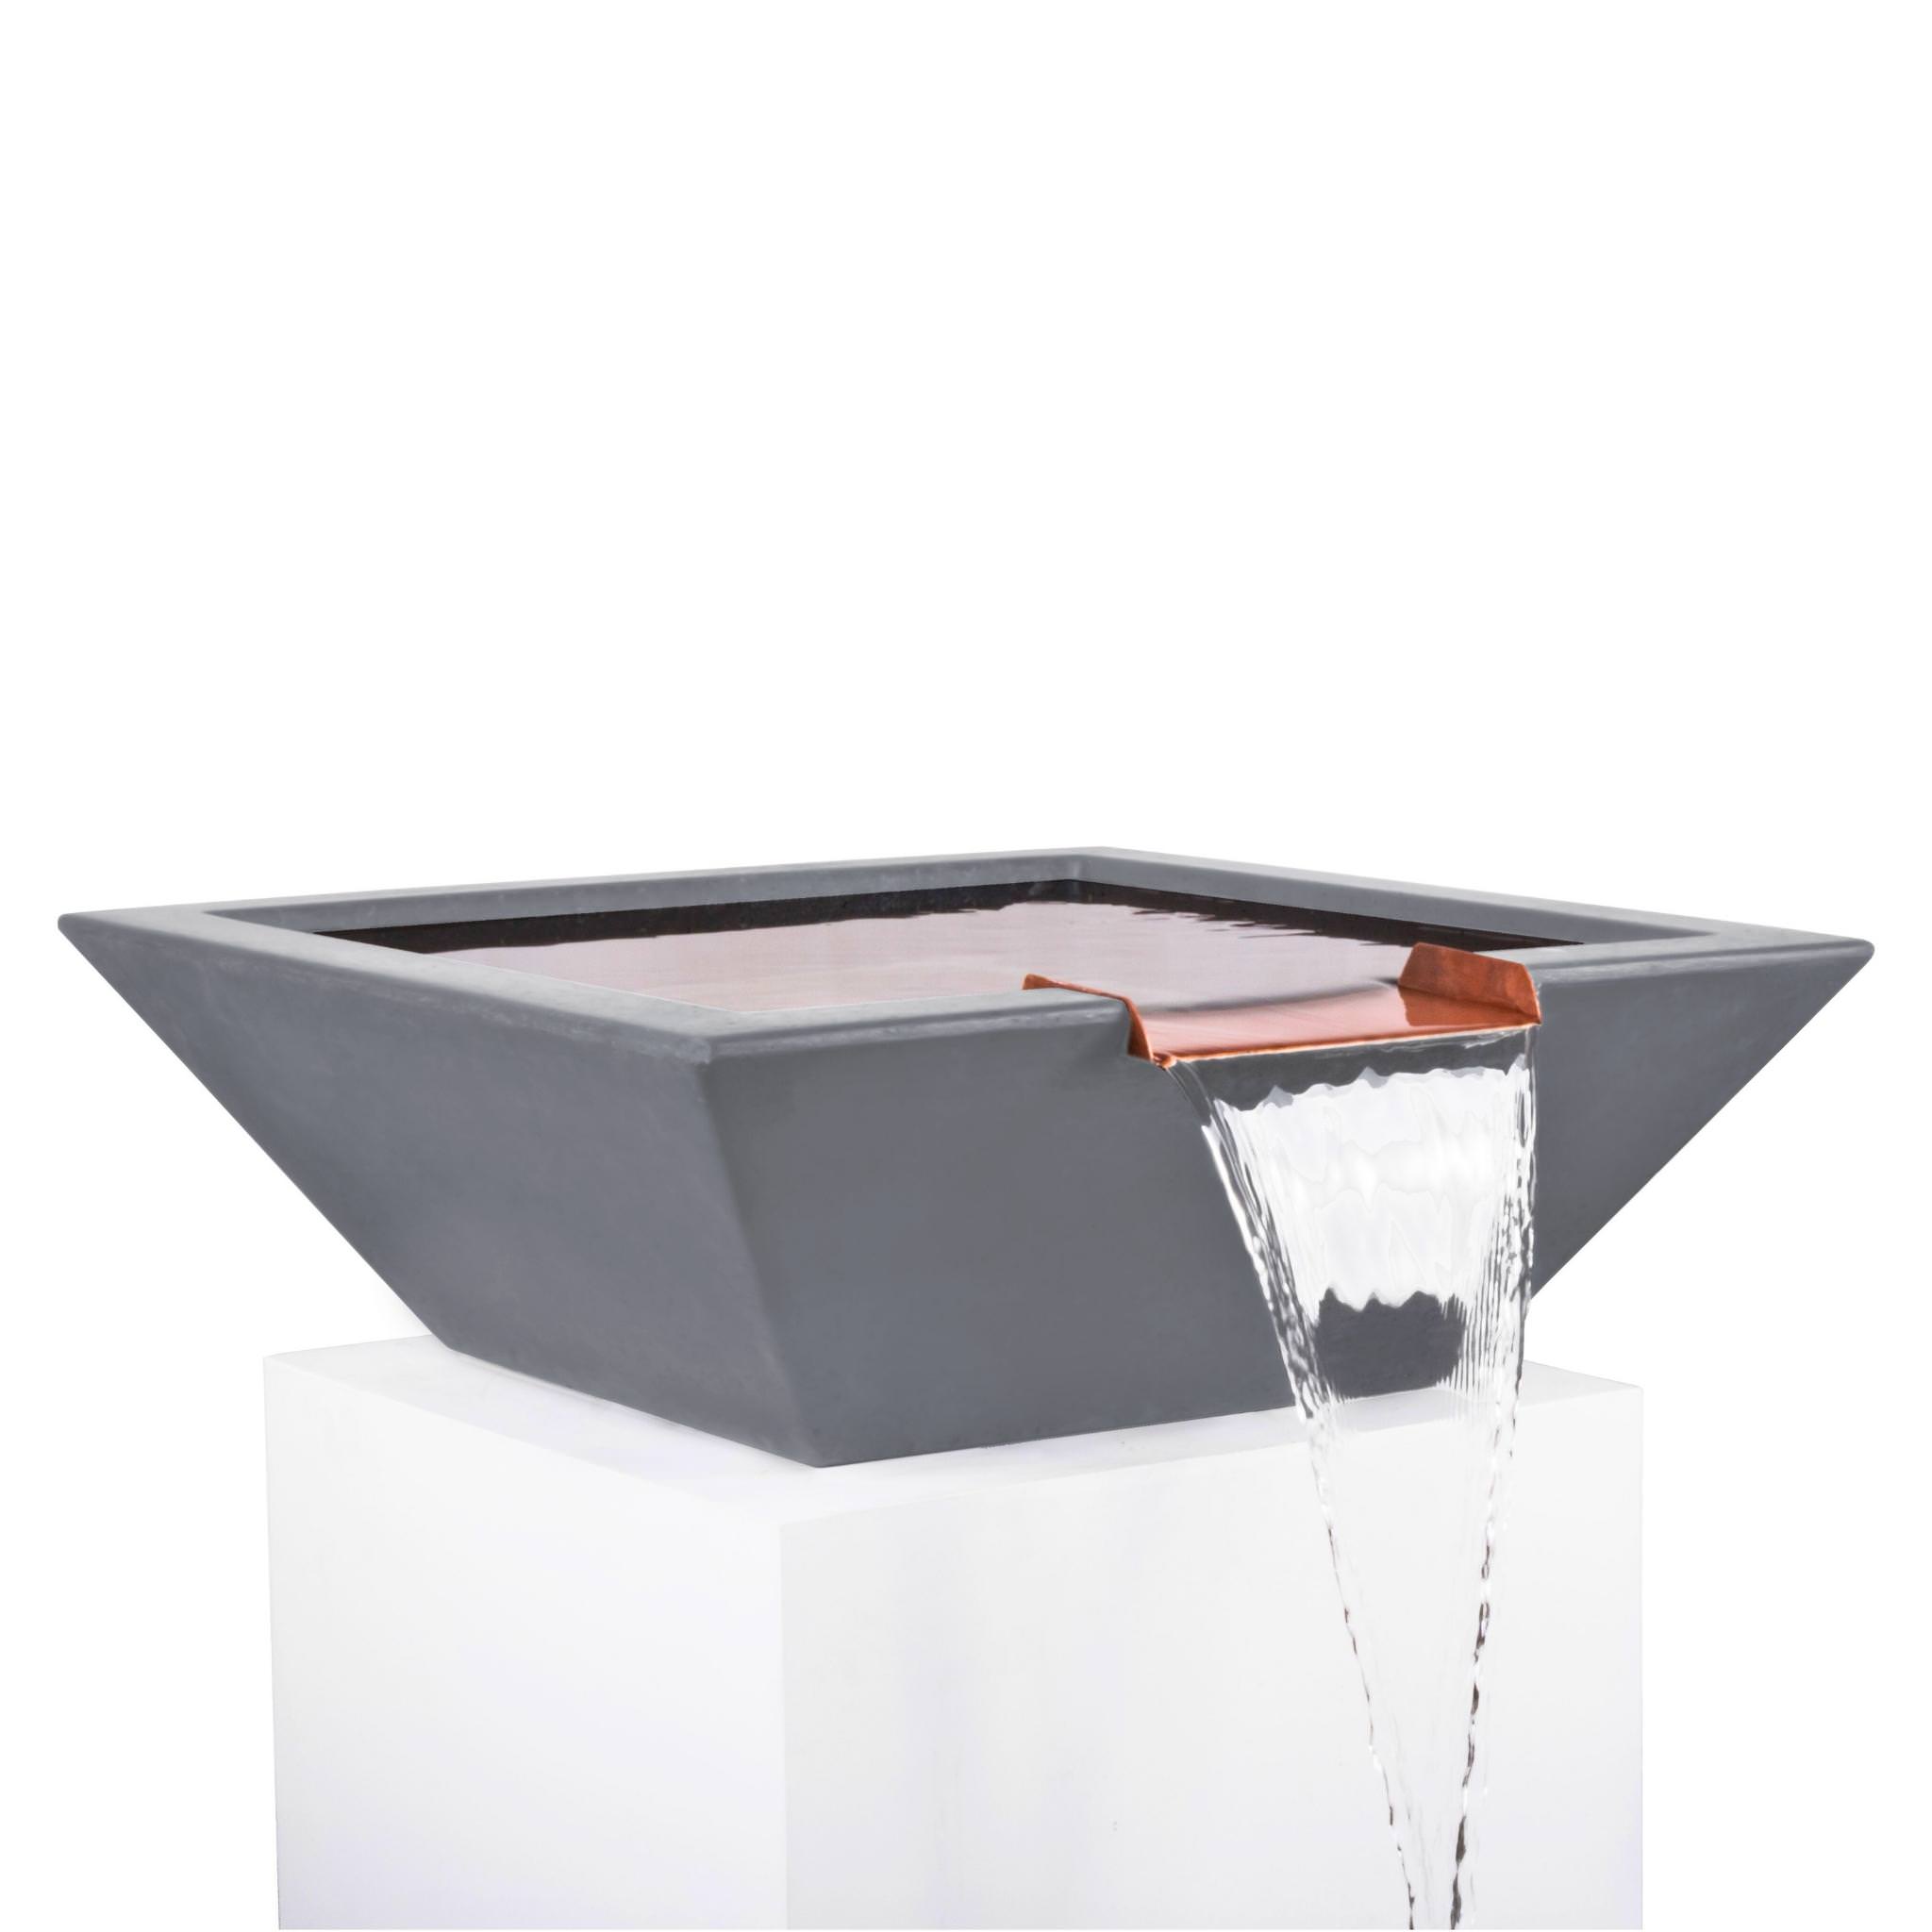 "Maya" Concrete Water Bowl - The Outdoor Plus